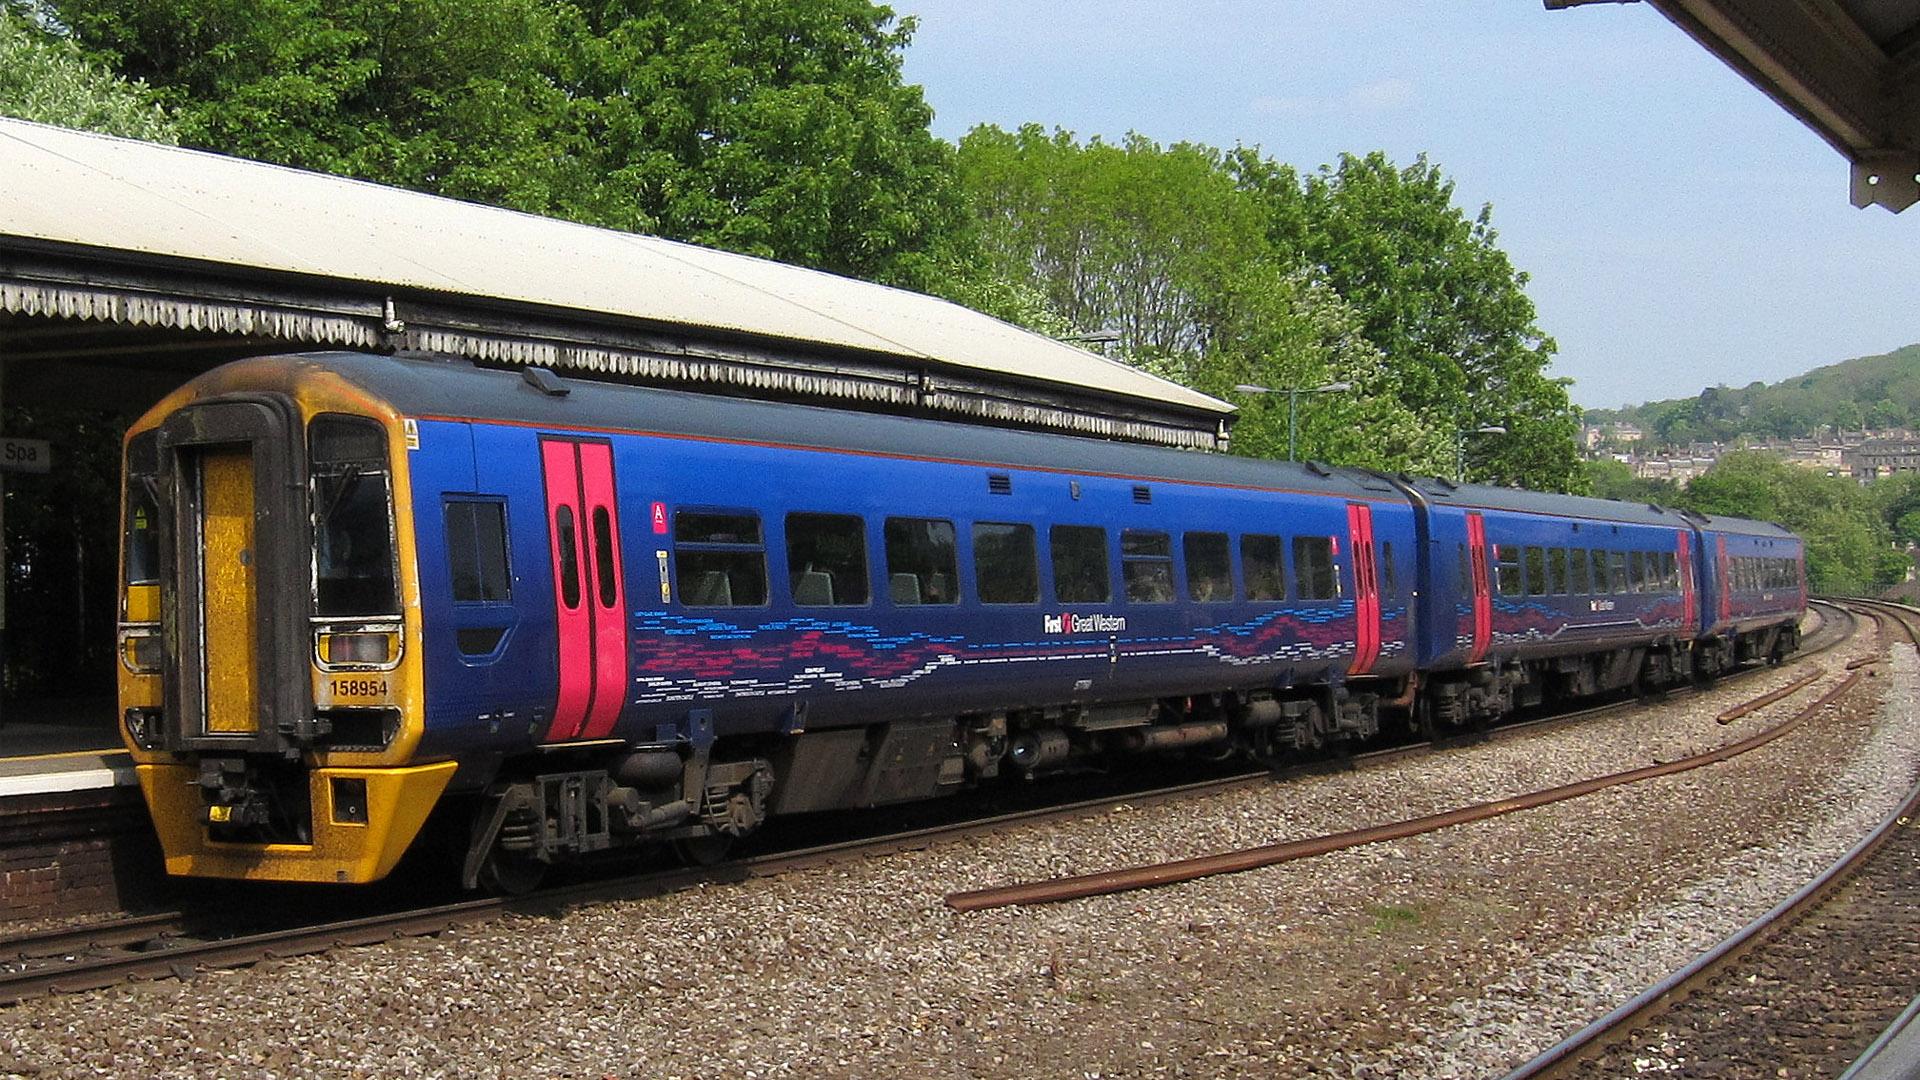 The Railway: First Great Western